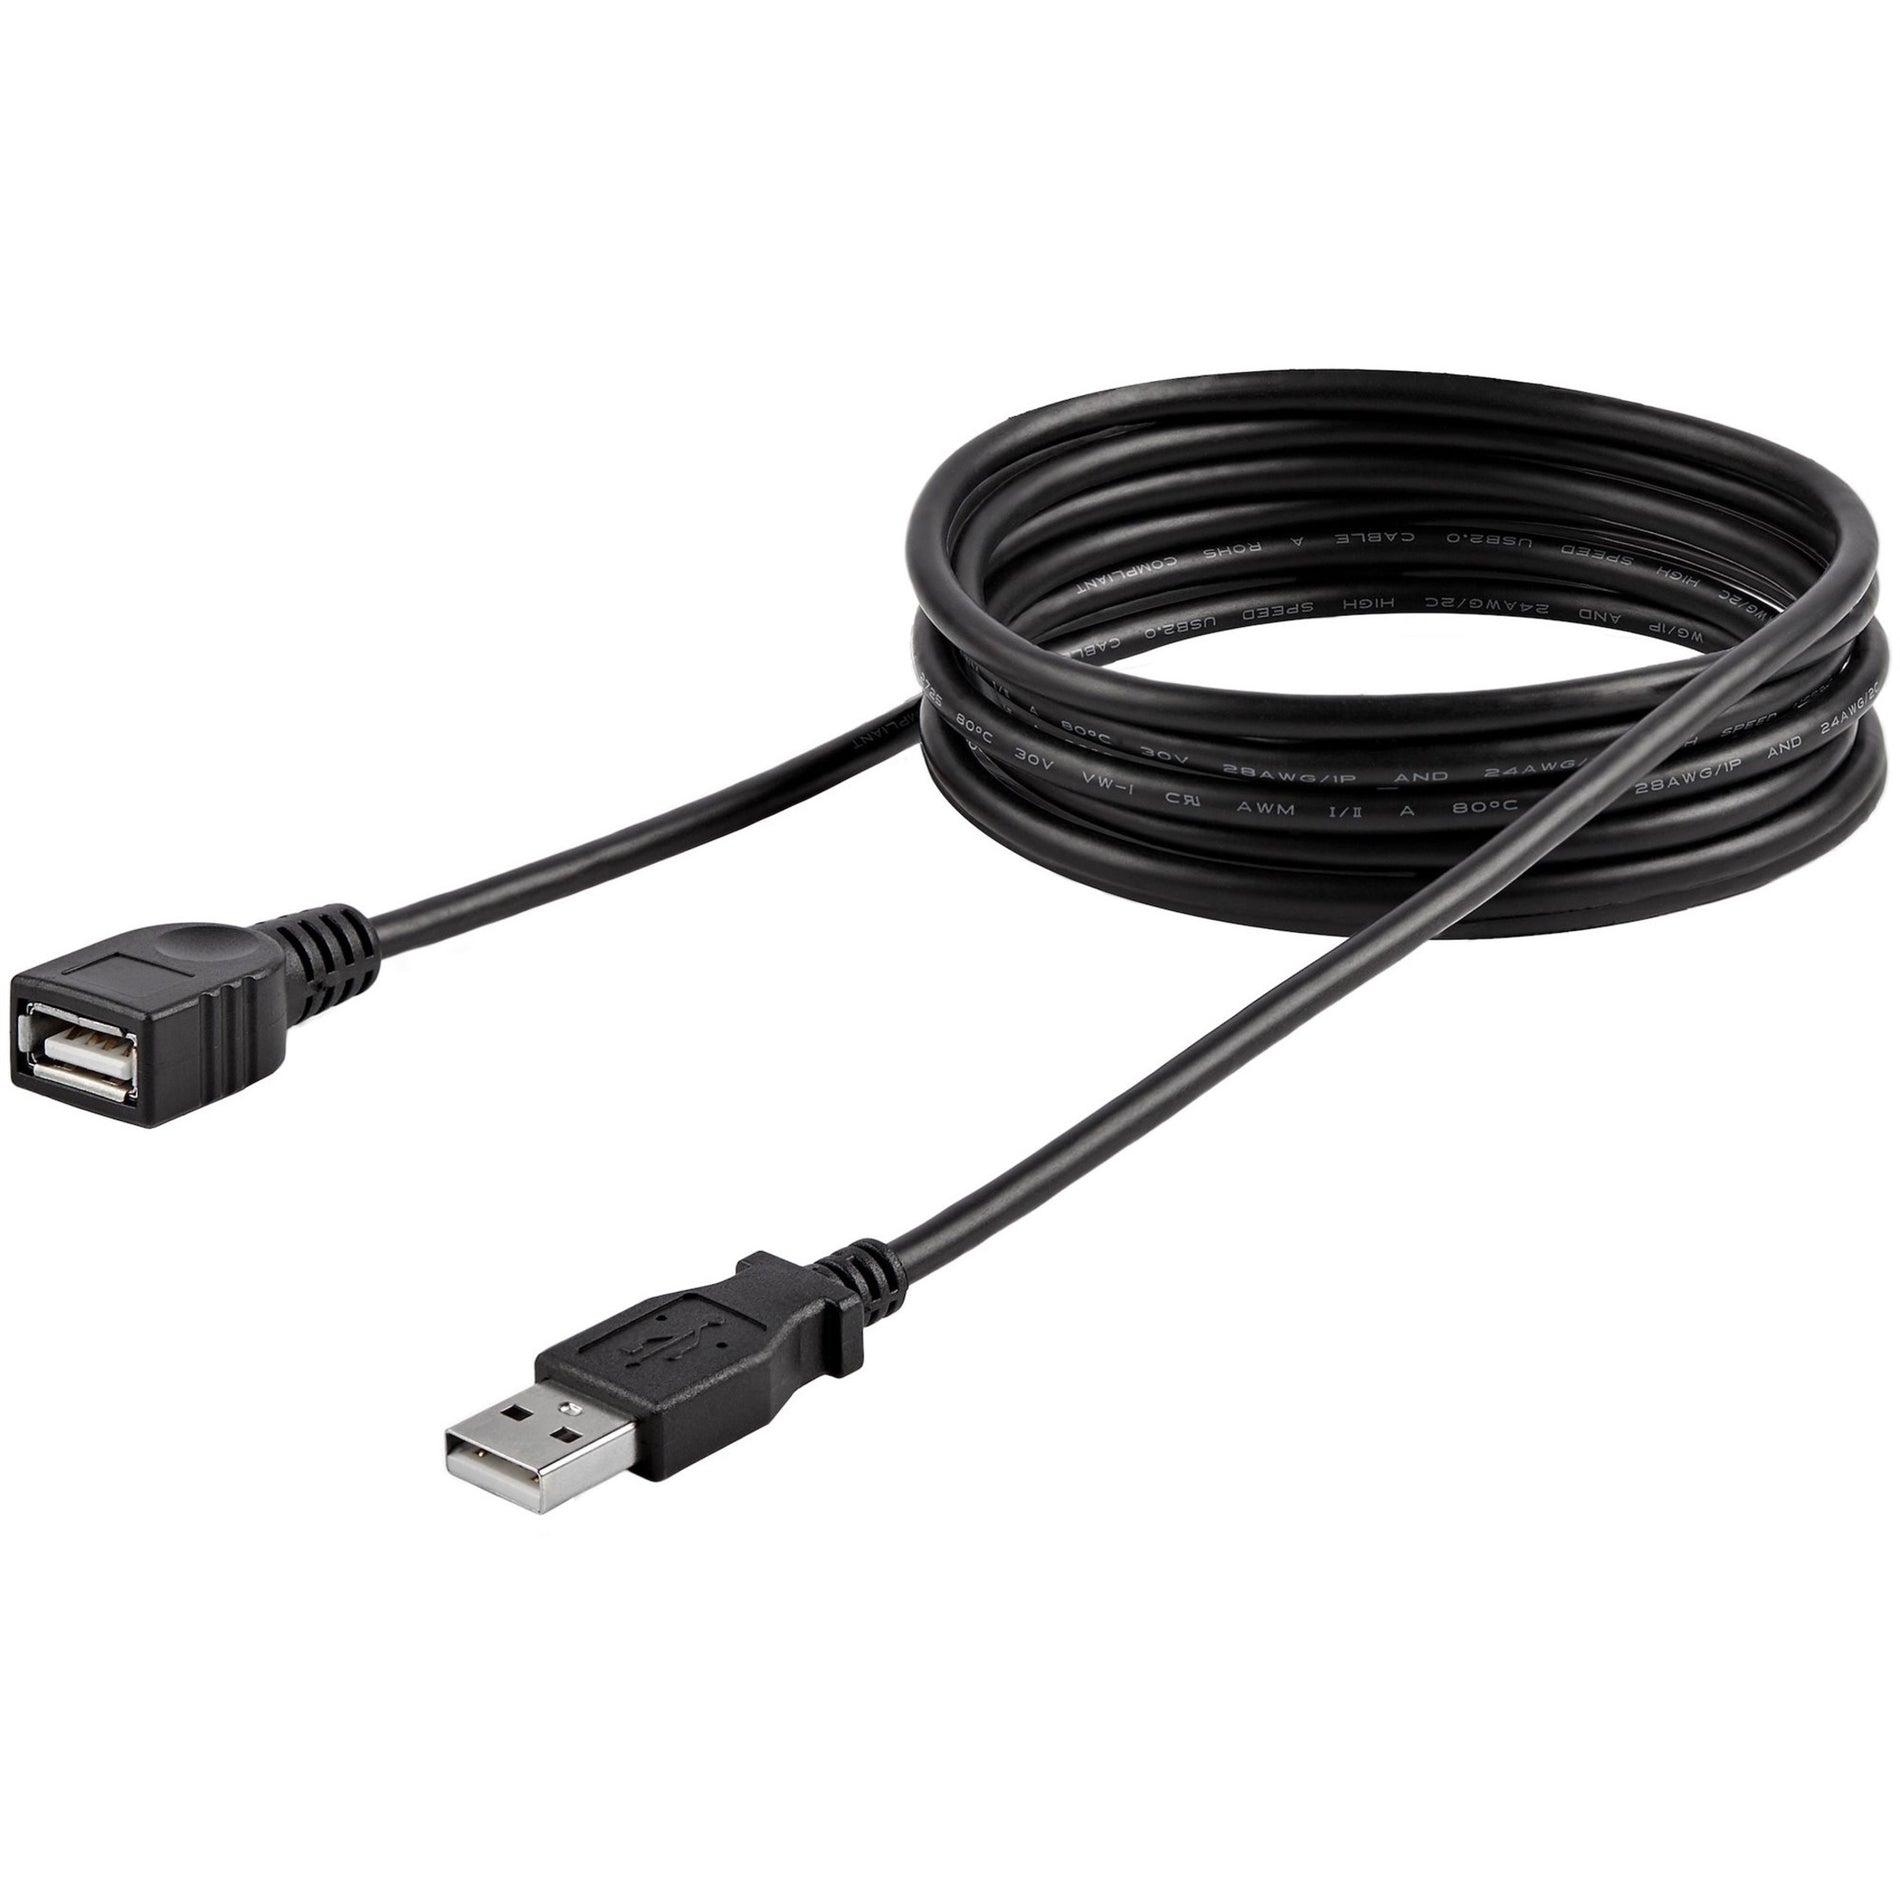 StarTech.com 6' USB 2.0 Certified A to B Cable - M/M-6 ft USB Printer Cable